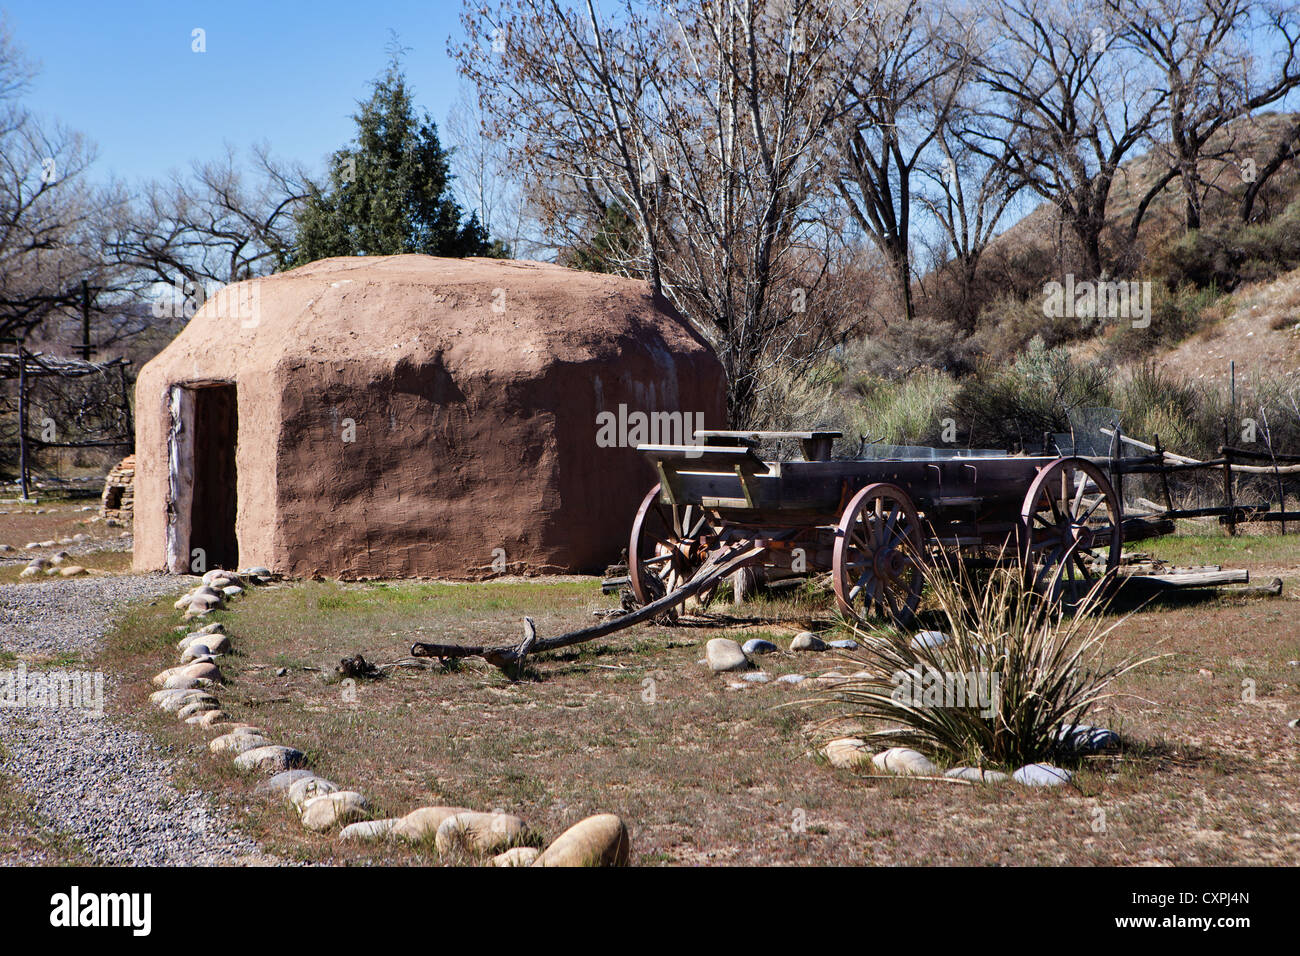 Salmon Ruins & Heritage Park, Ancient Chacoan archaeological ruin site, New Mexico Stock Photo